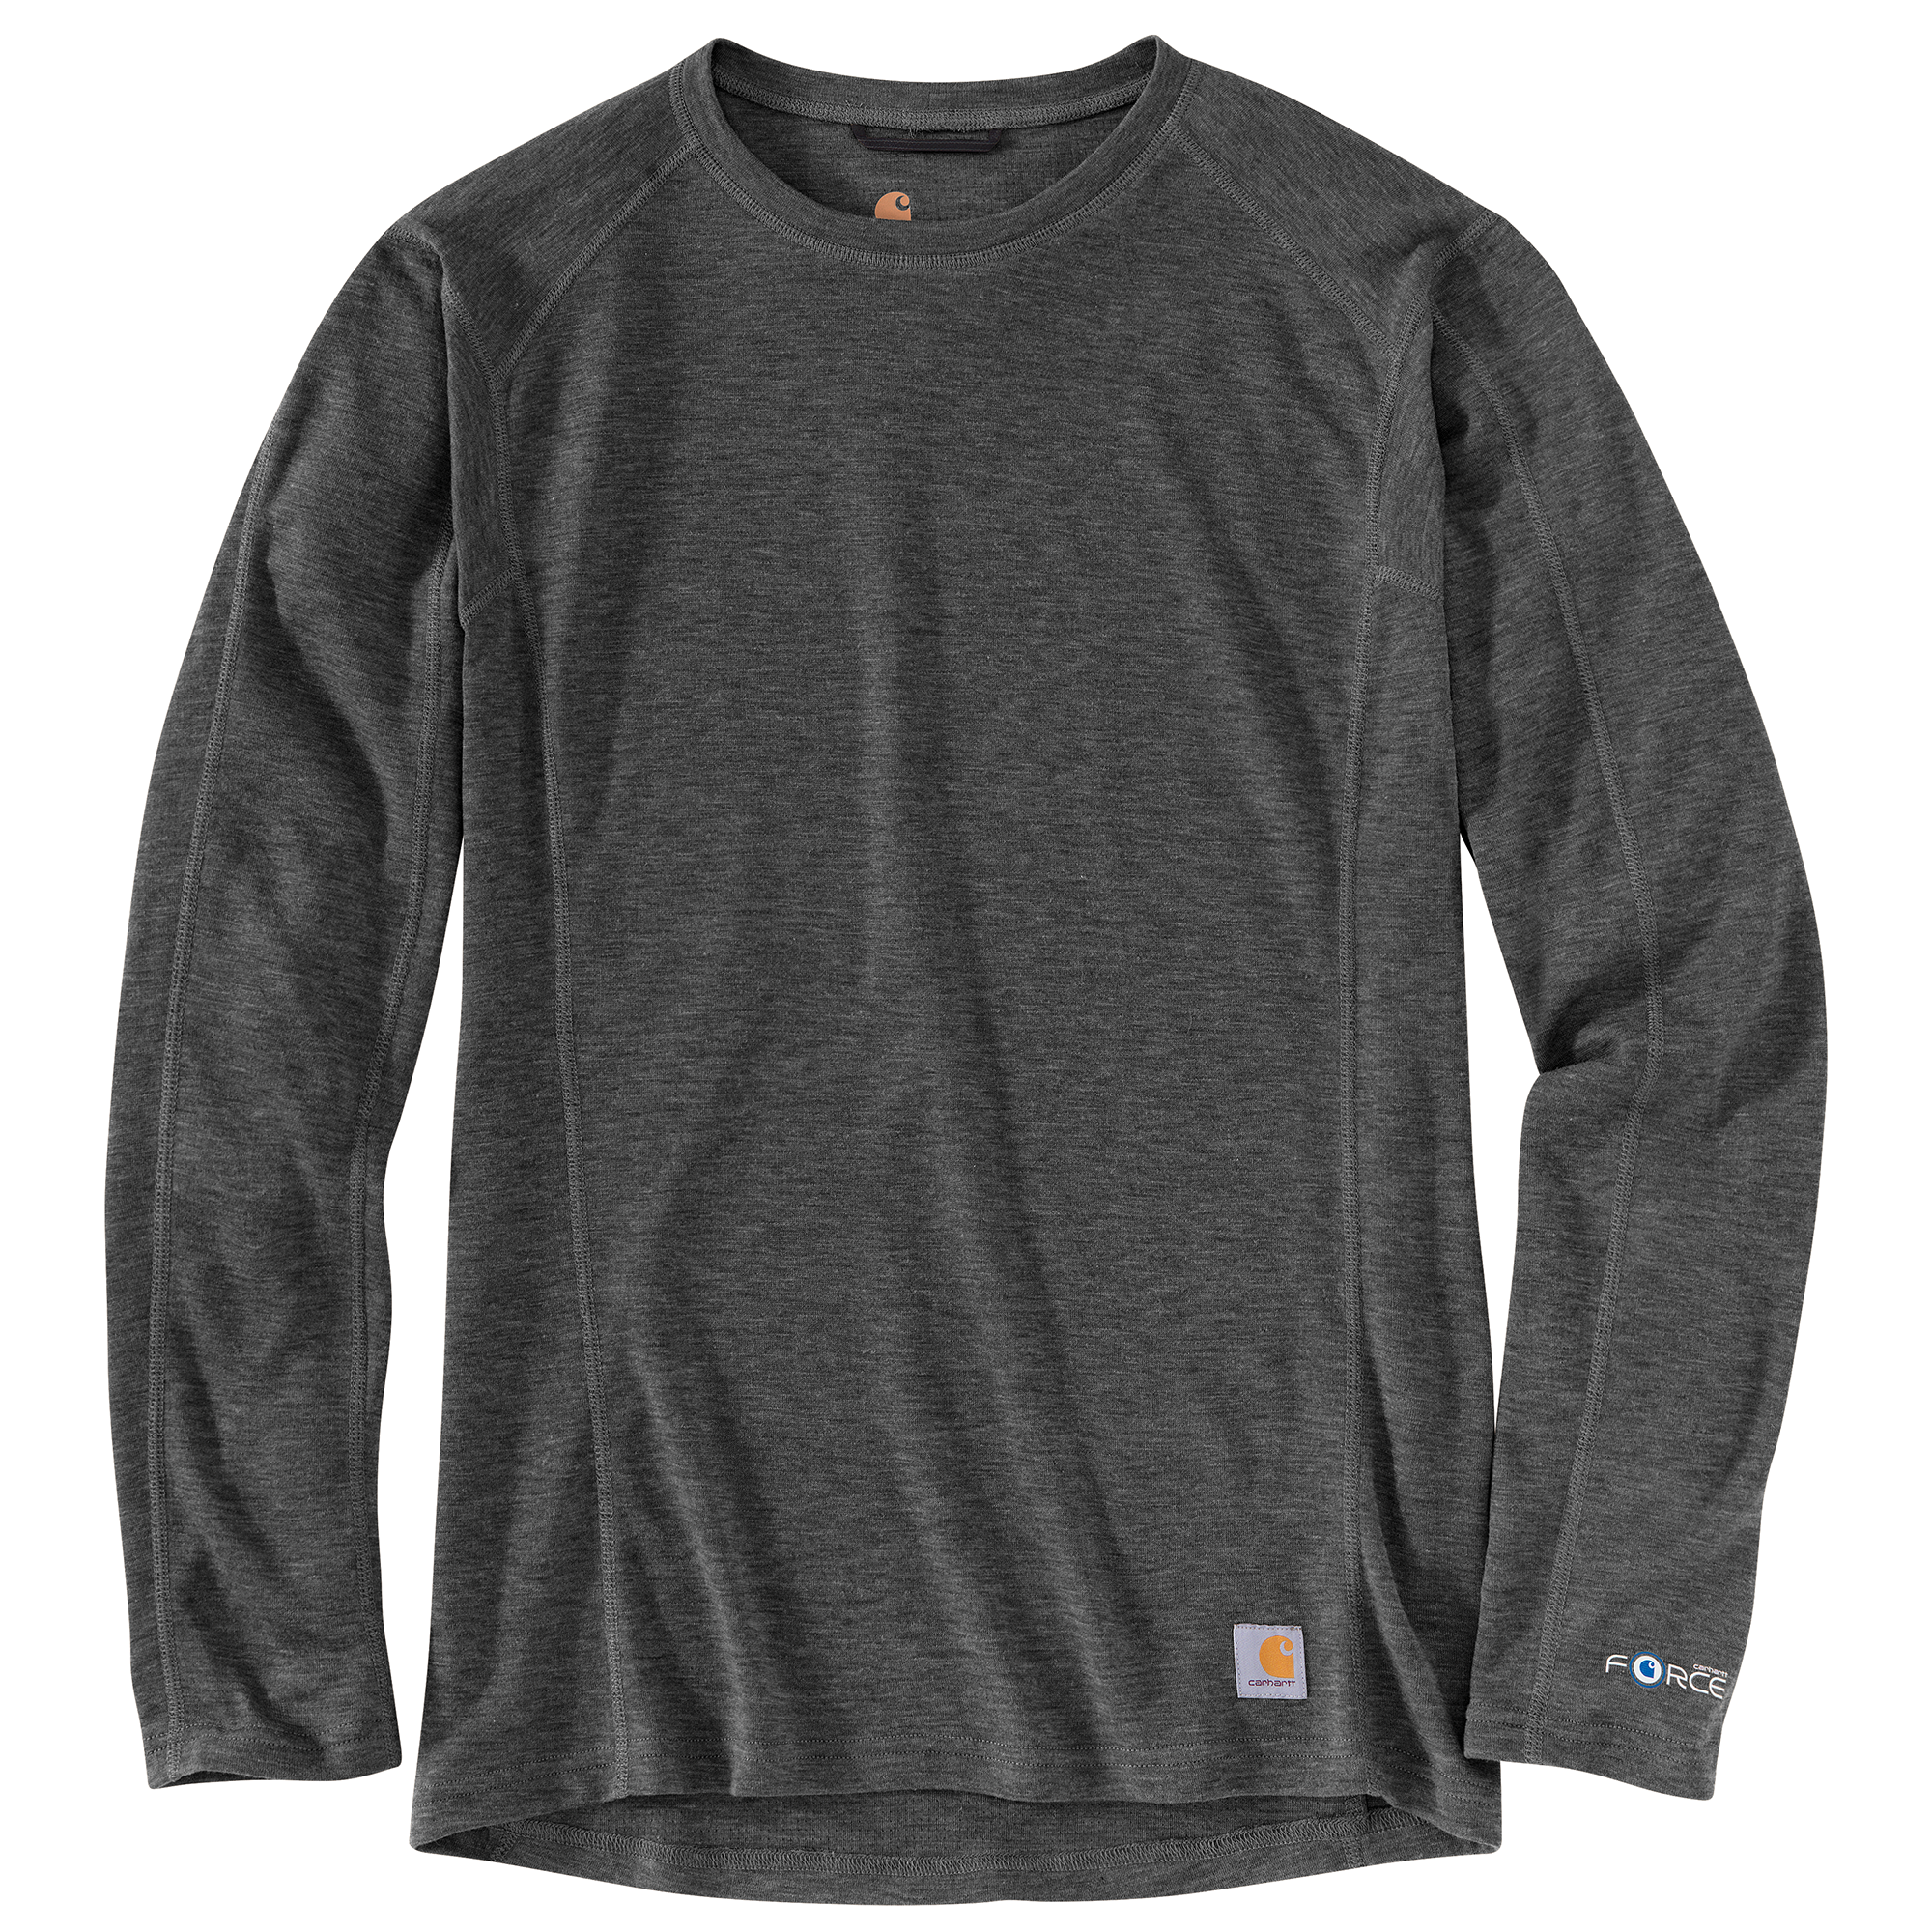 Carhartt Men's Force Midweight Micro-grid Base Layer Top